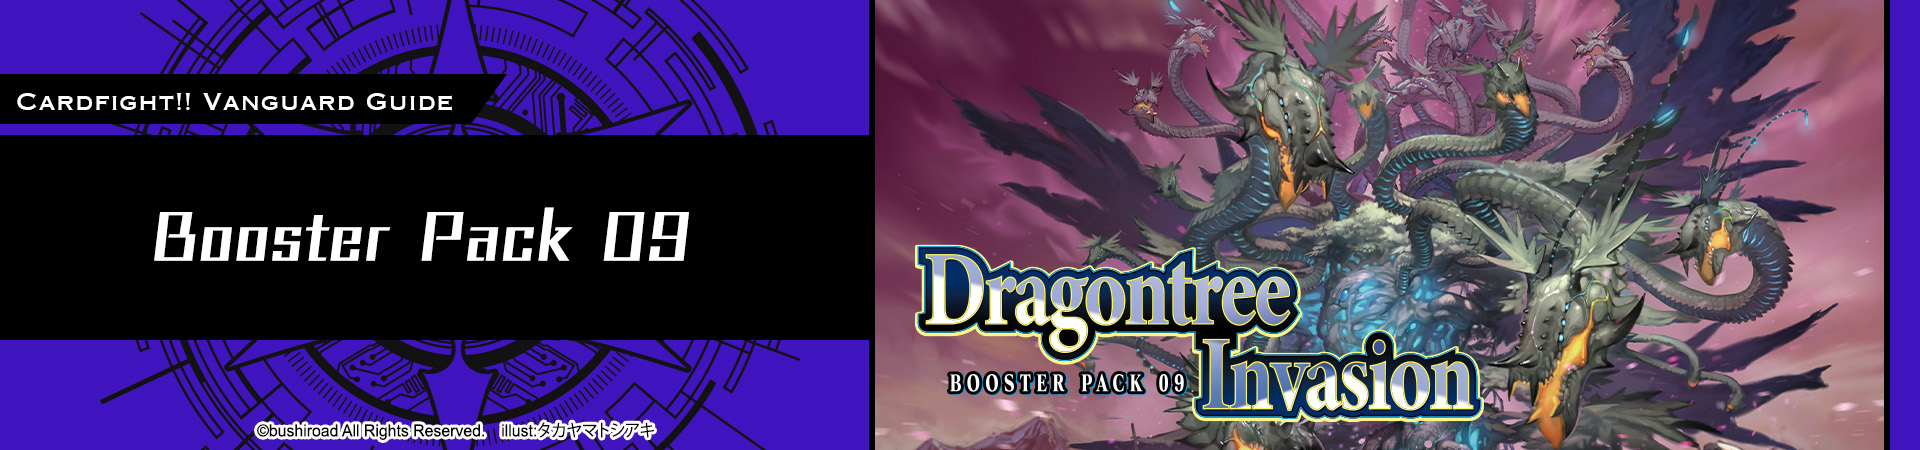  Cardfight!! Vanguard Booster Pack 09: Dragontree Invasion